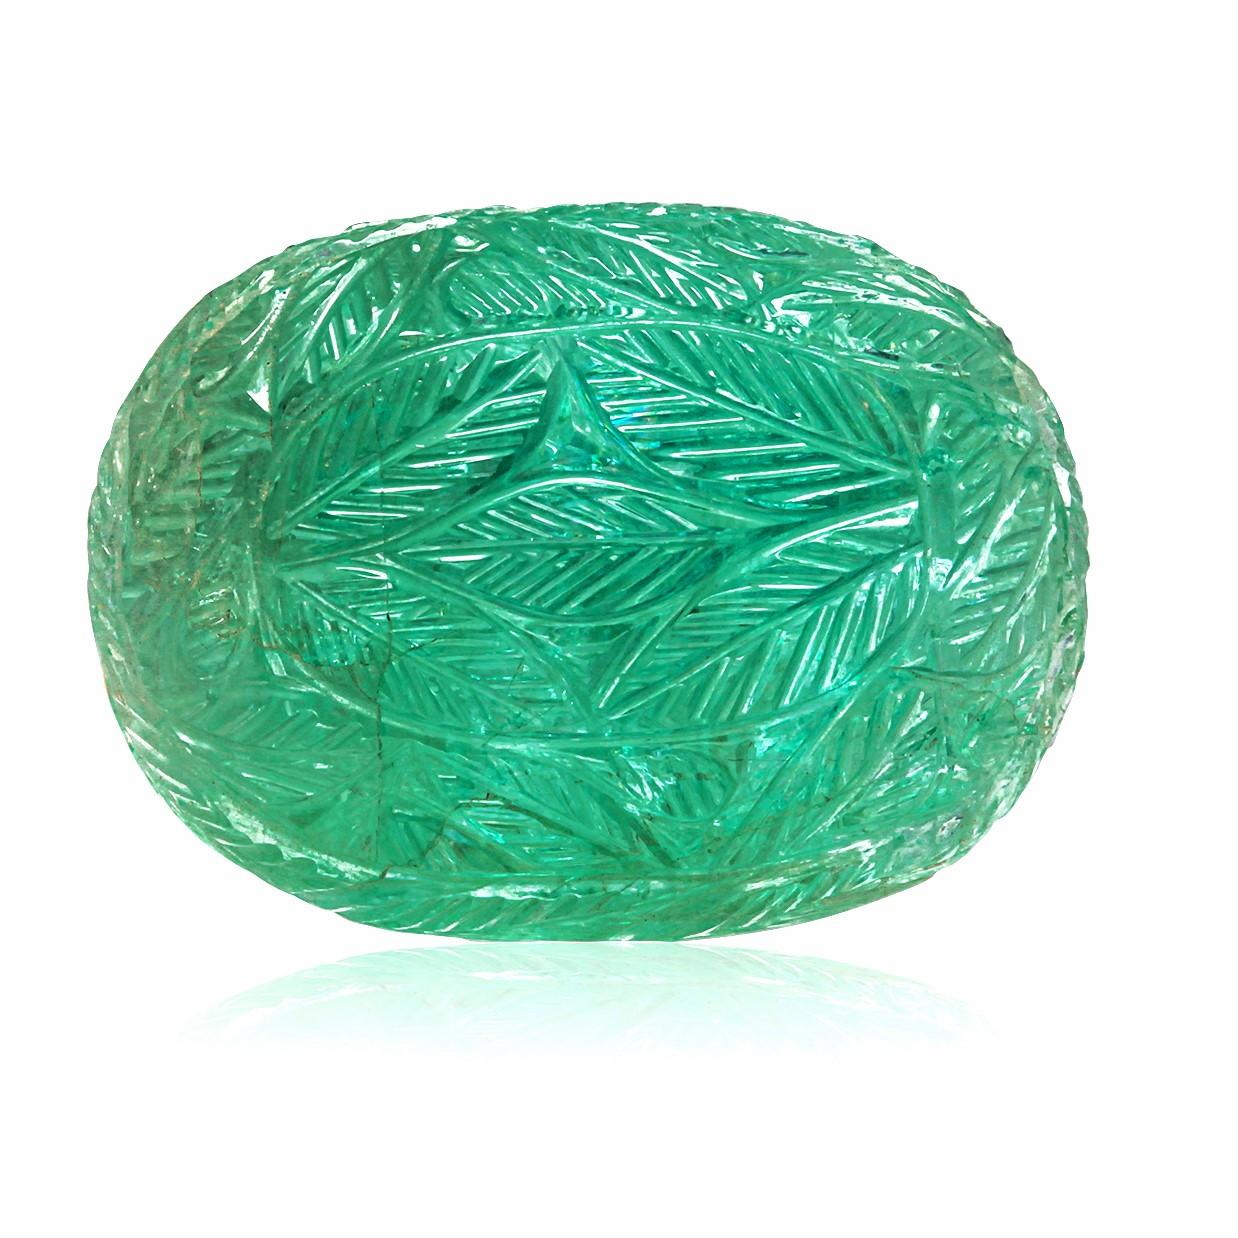 Contemporary GIA Certificated Oval Carved Double Sided Cabochon Emerald Weighing 53.64 Carats For Sale